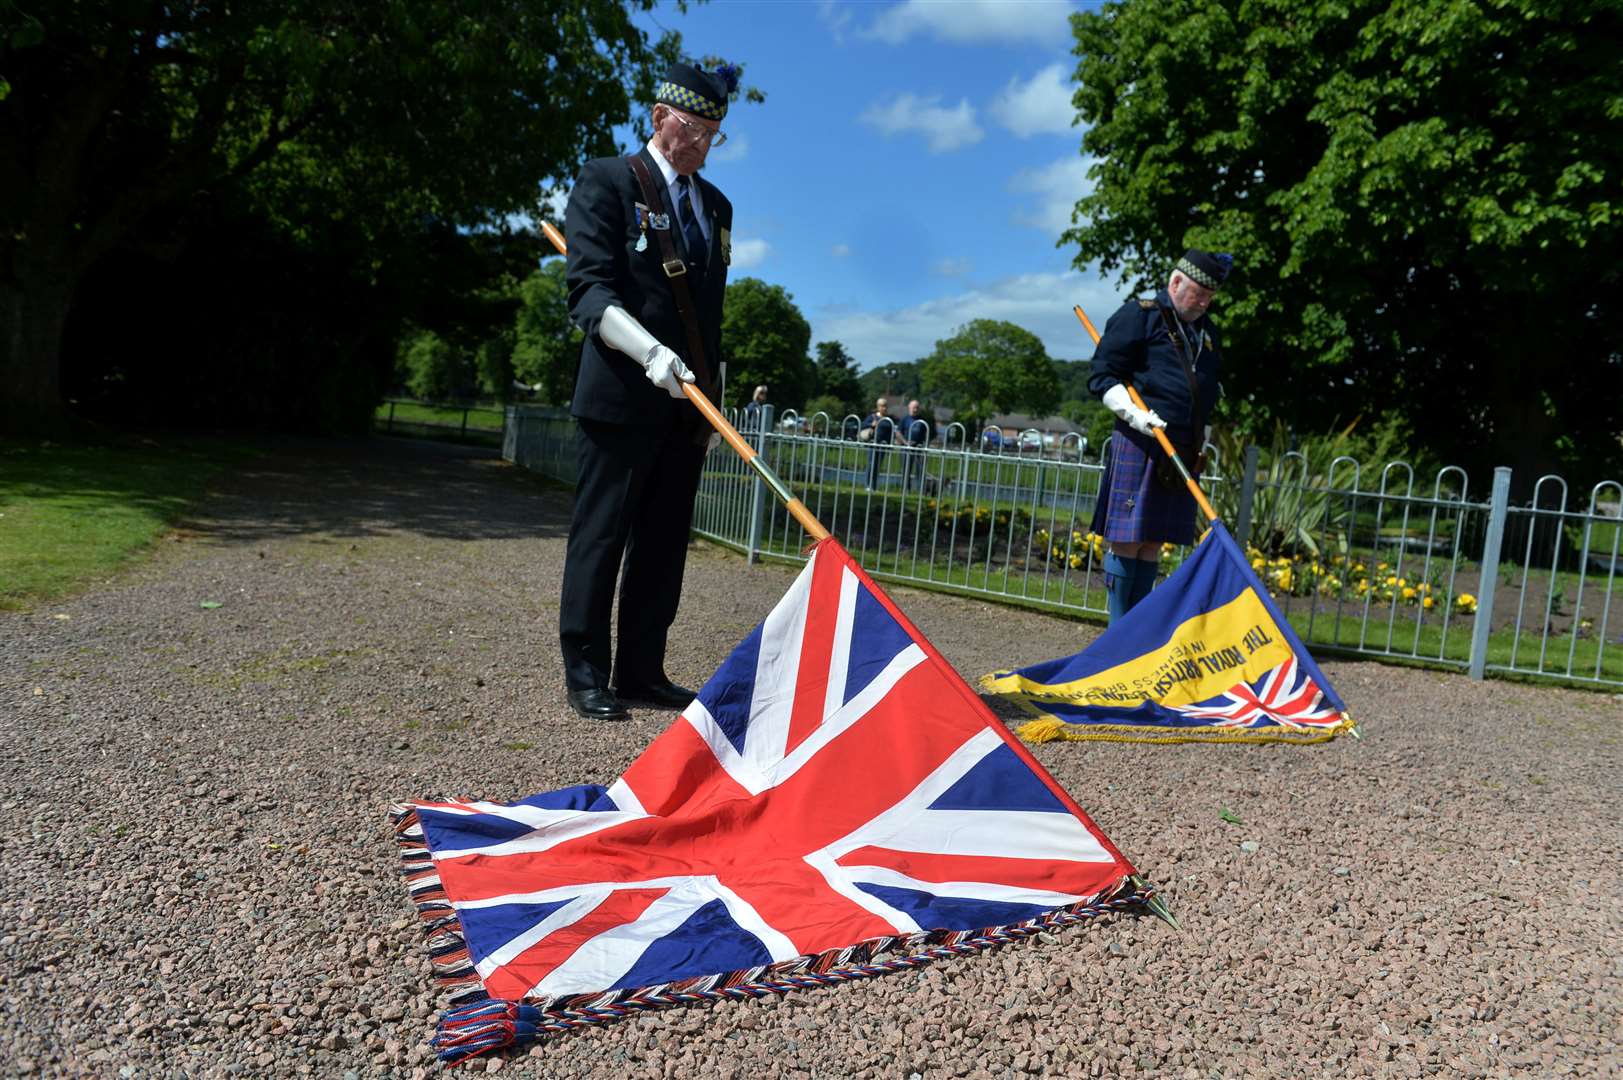 Bill Dingwall (right) and Joe Davidson mark the 100th anniversary of the Royal British Legion during a ceremony at Cavell Gardens war memorial in Inverness.